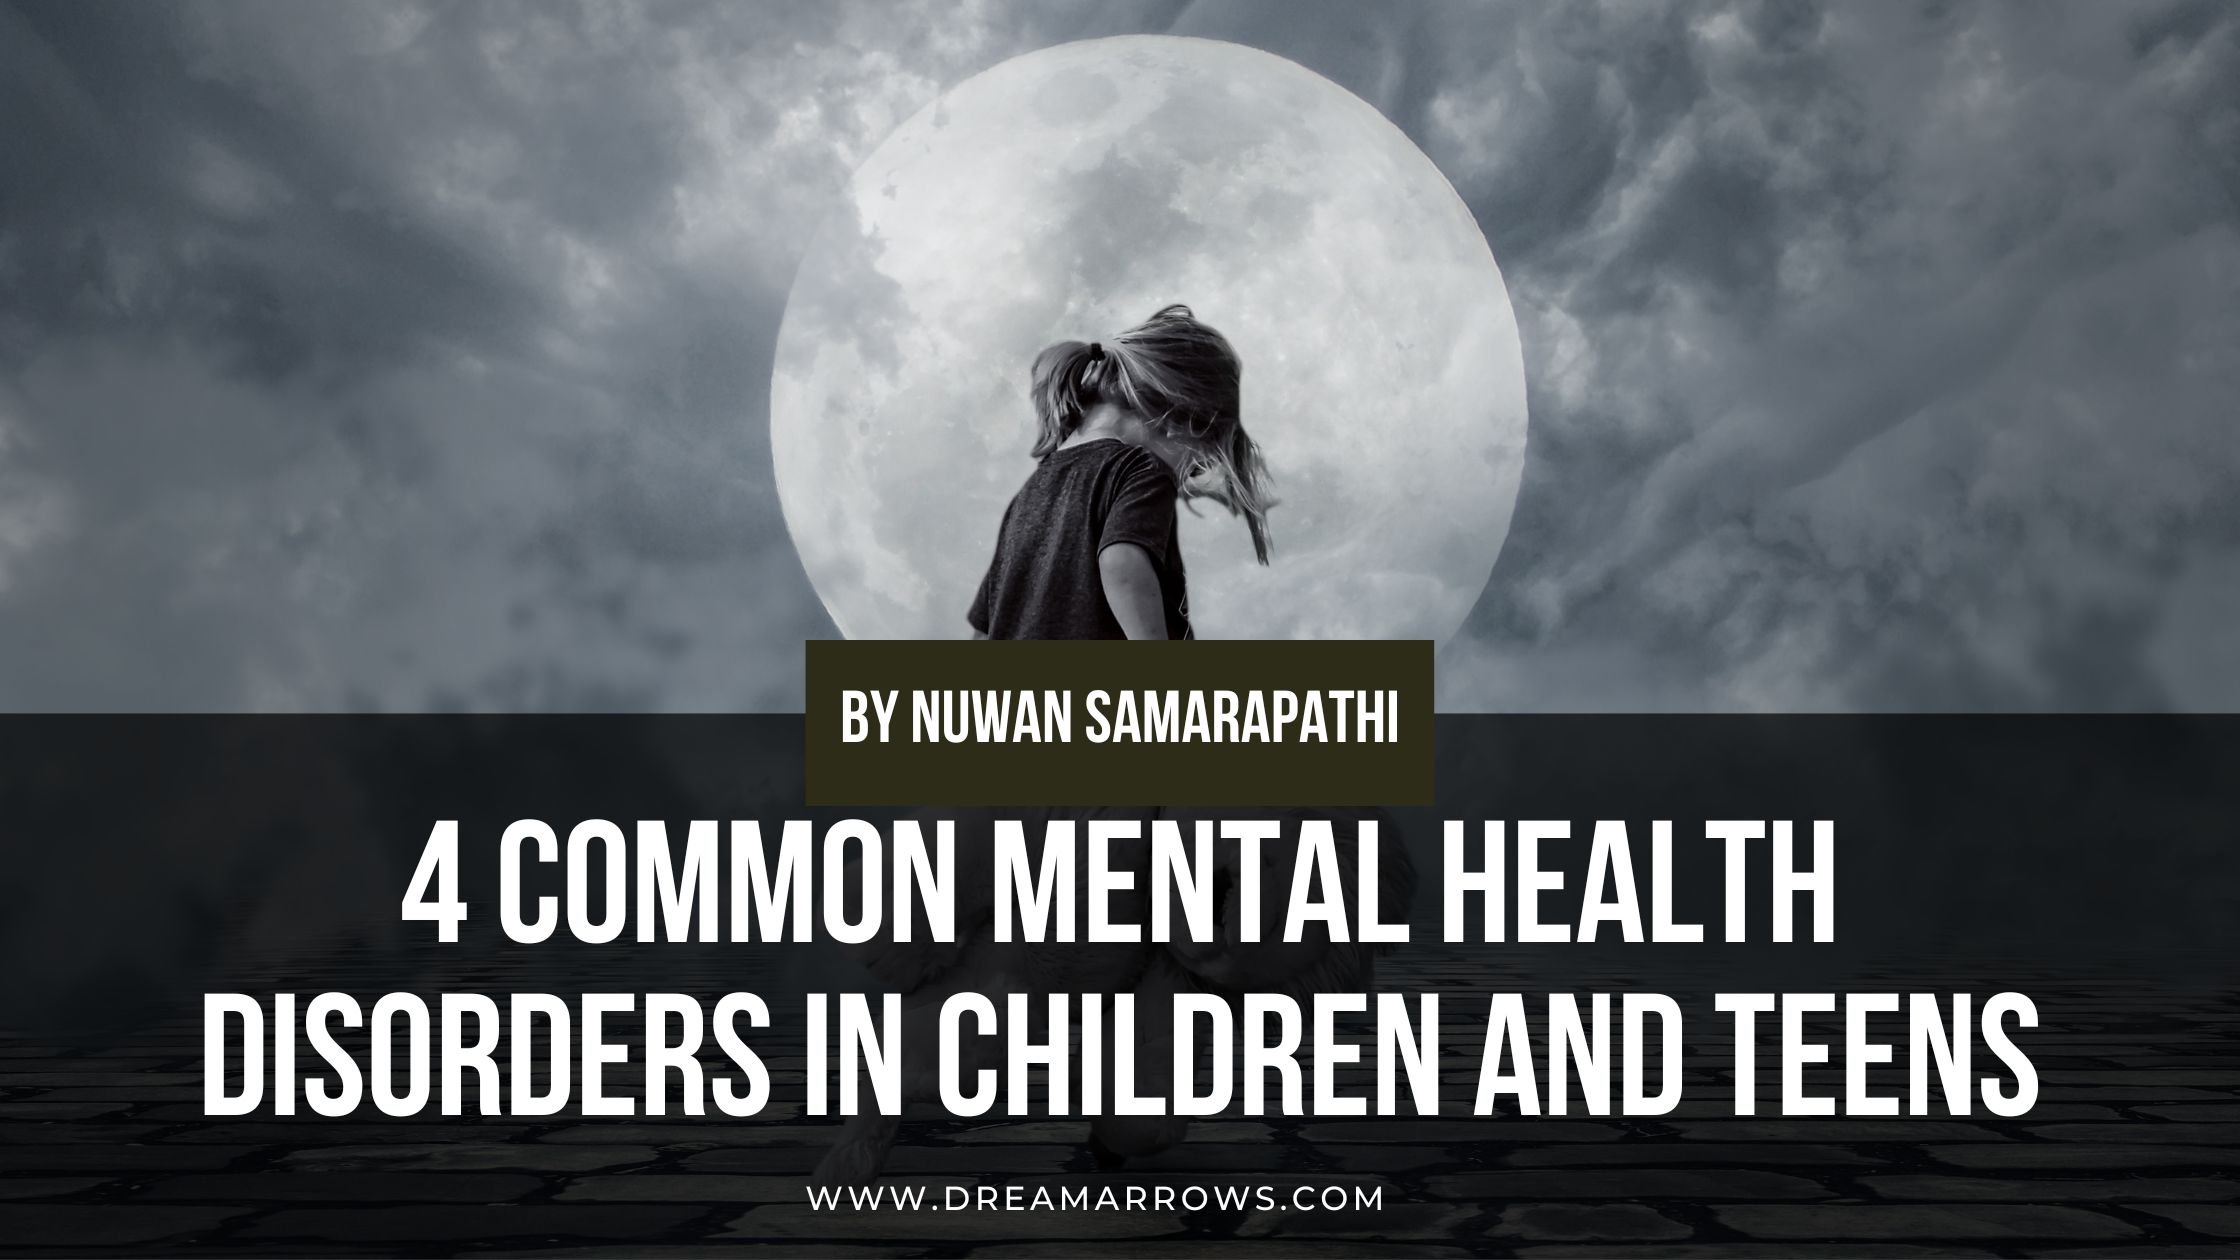 4 Common Mental Health Disorders in Children And Teens